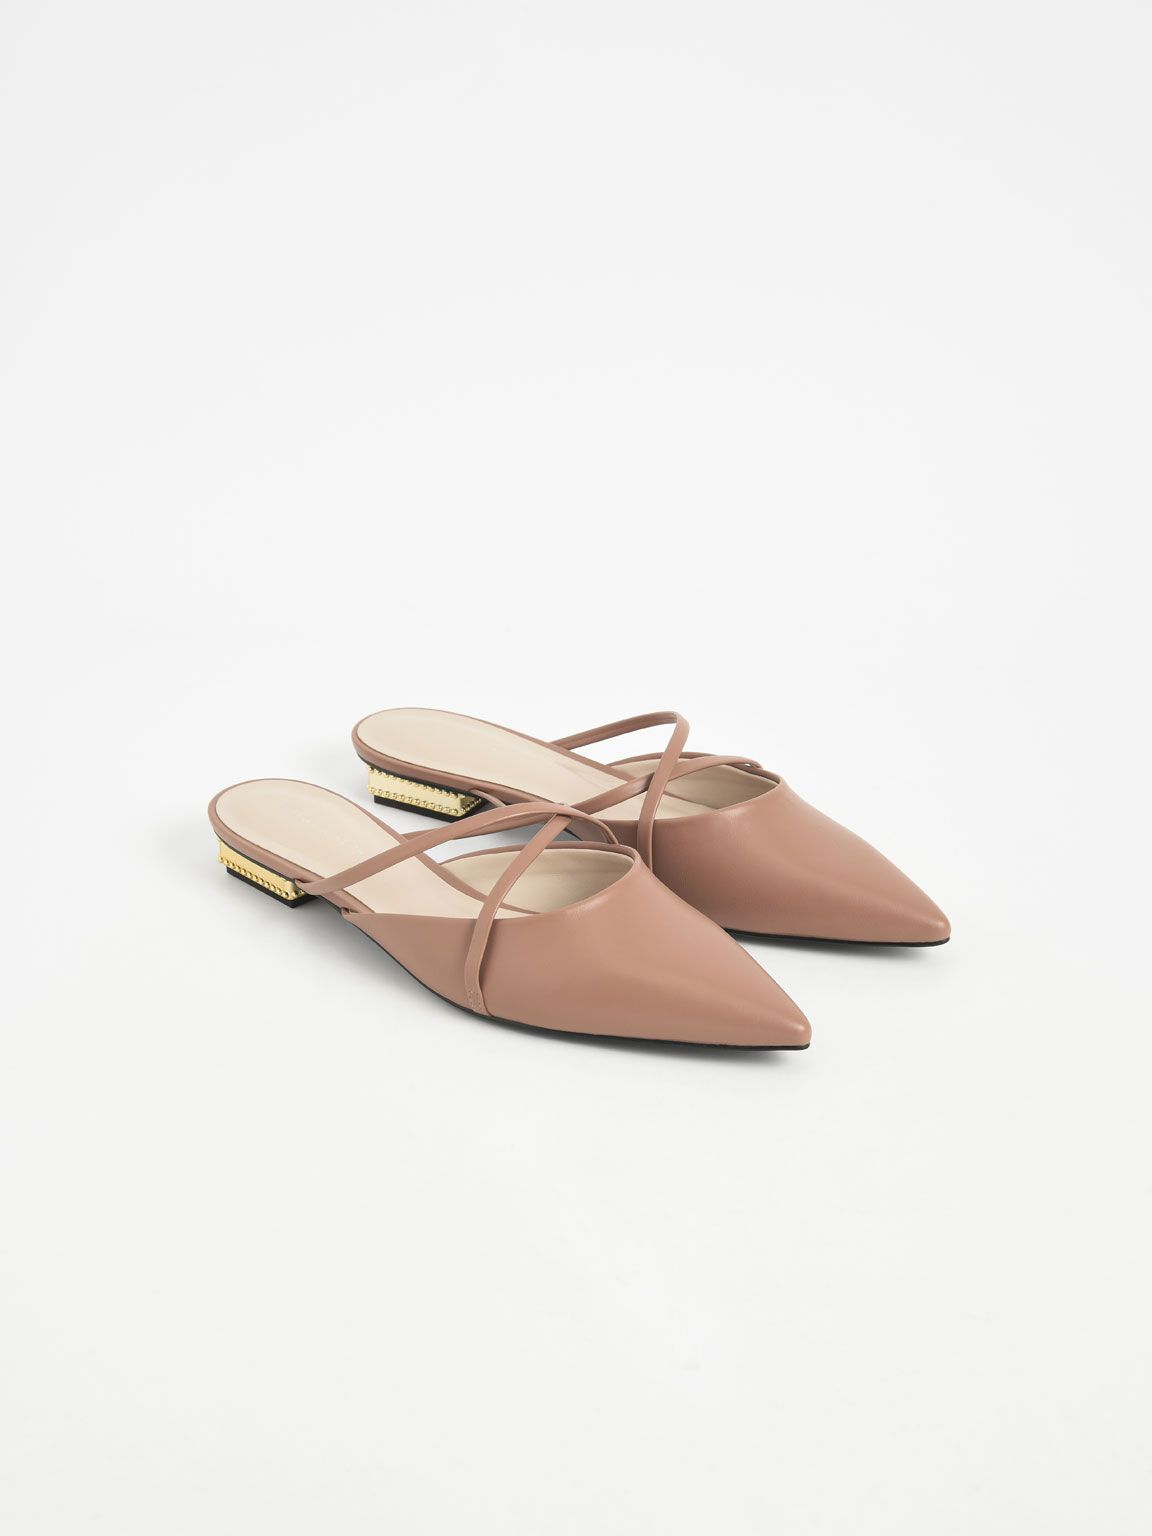 Pointed Toe Cross Strap Mules, Camel, hi-res